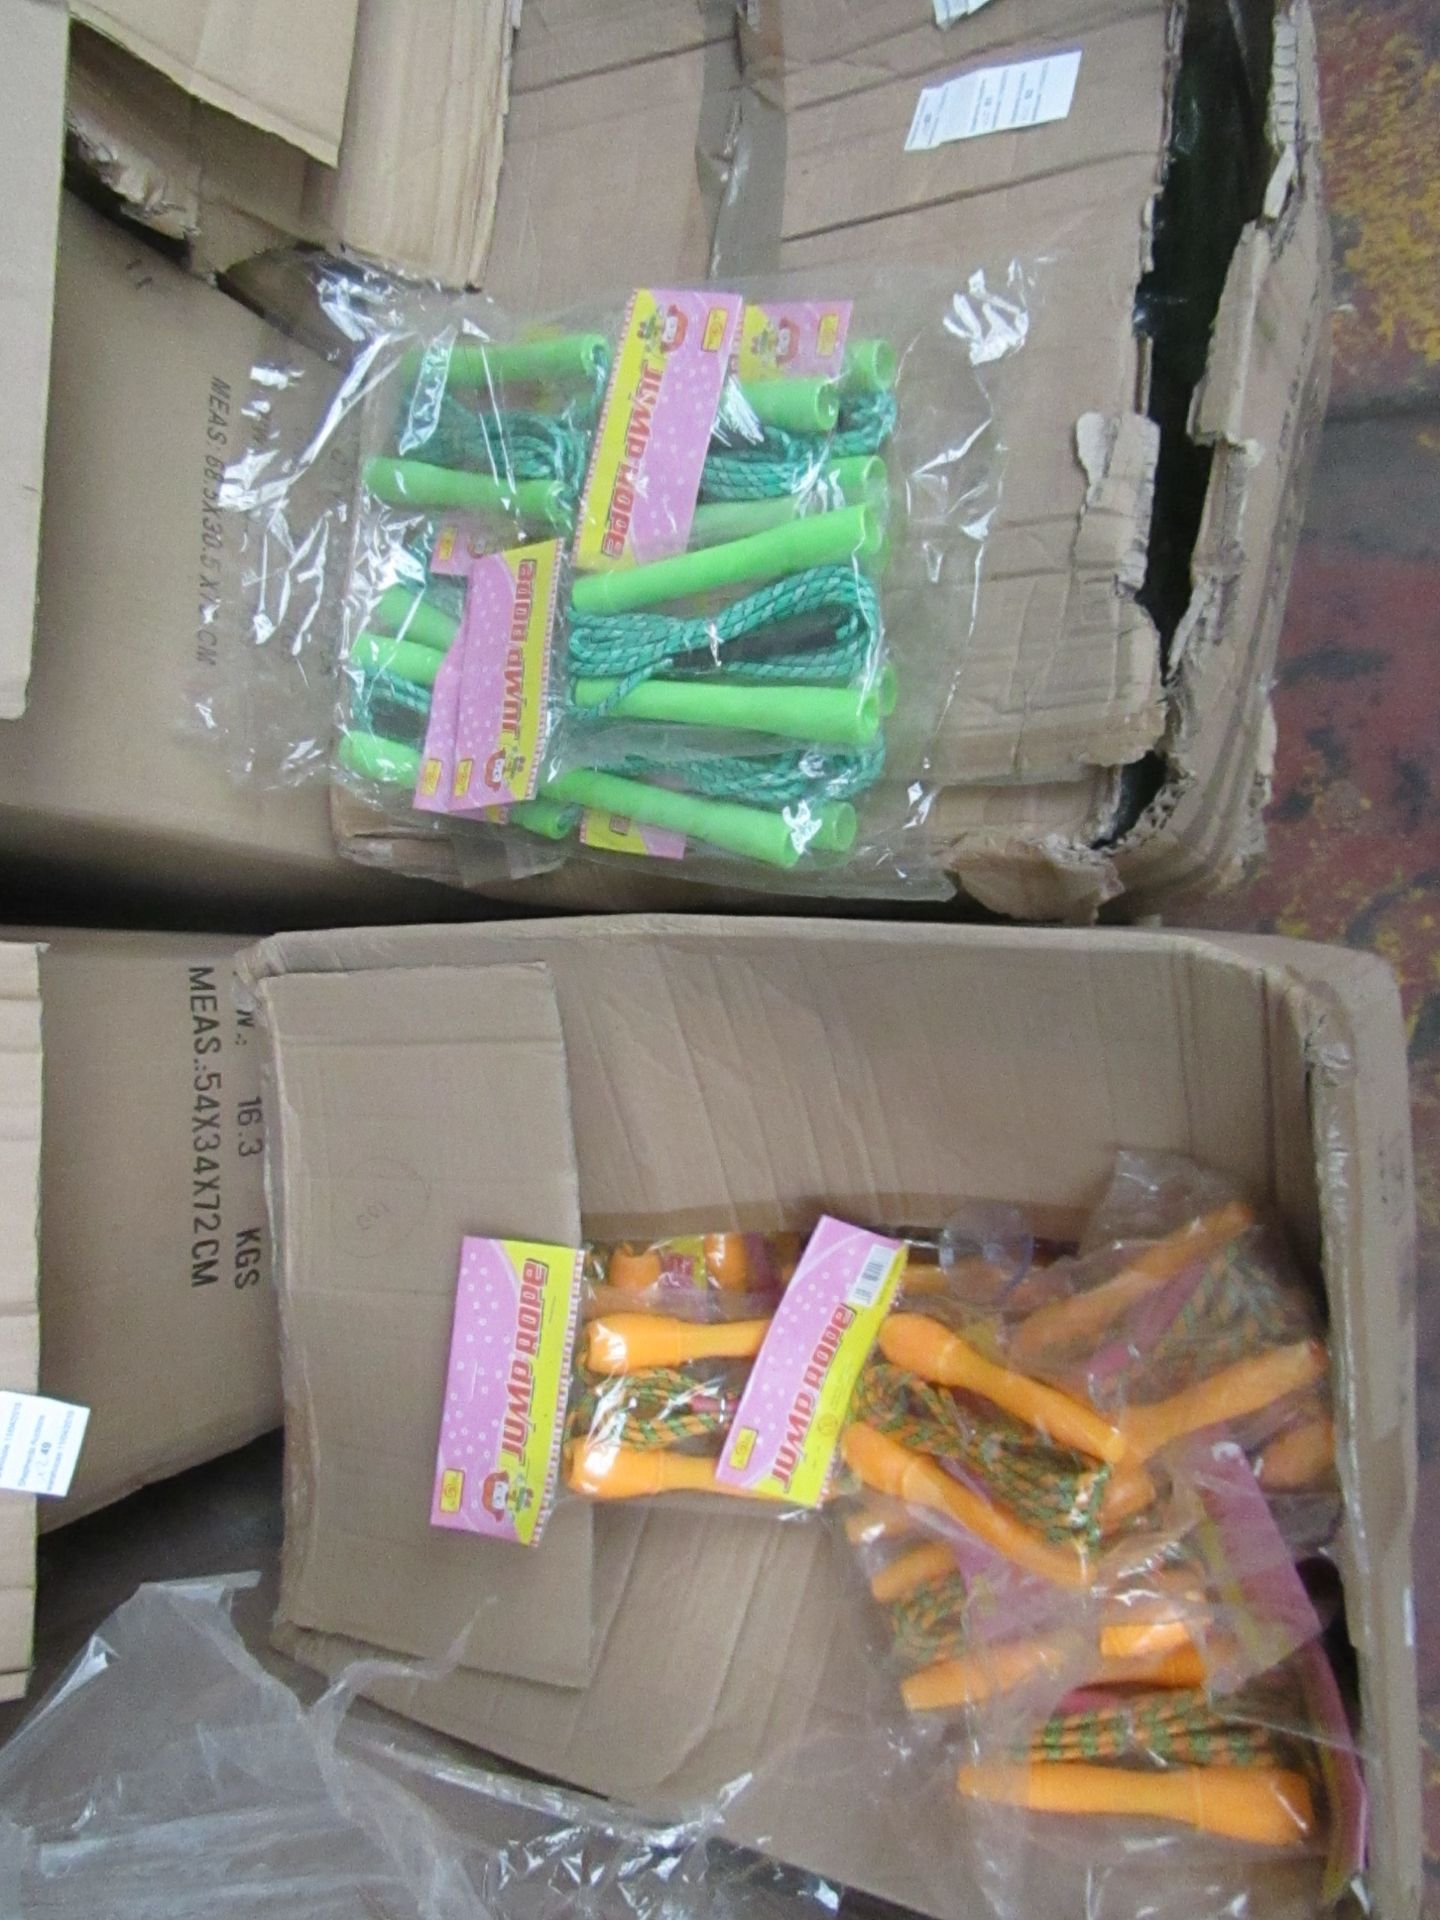 20x Leaping ability Plastic handle skipping ropes, will come in either orange or green or both.